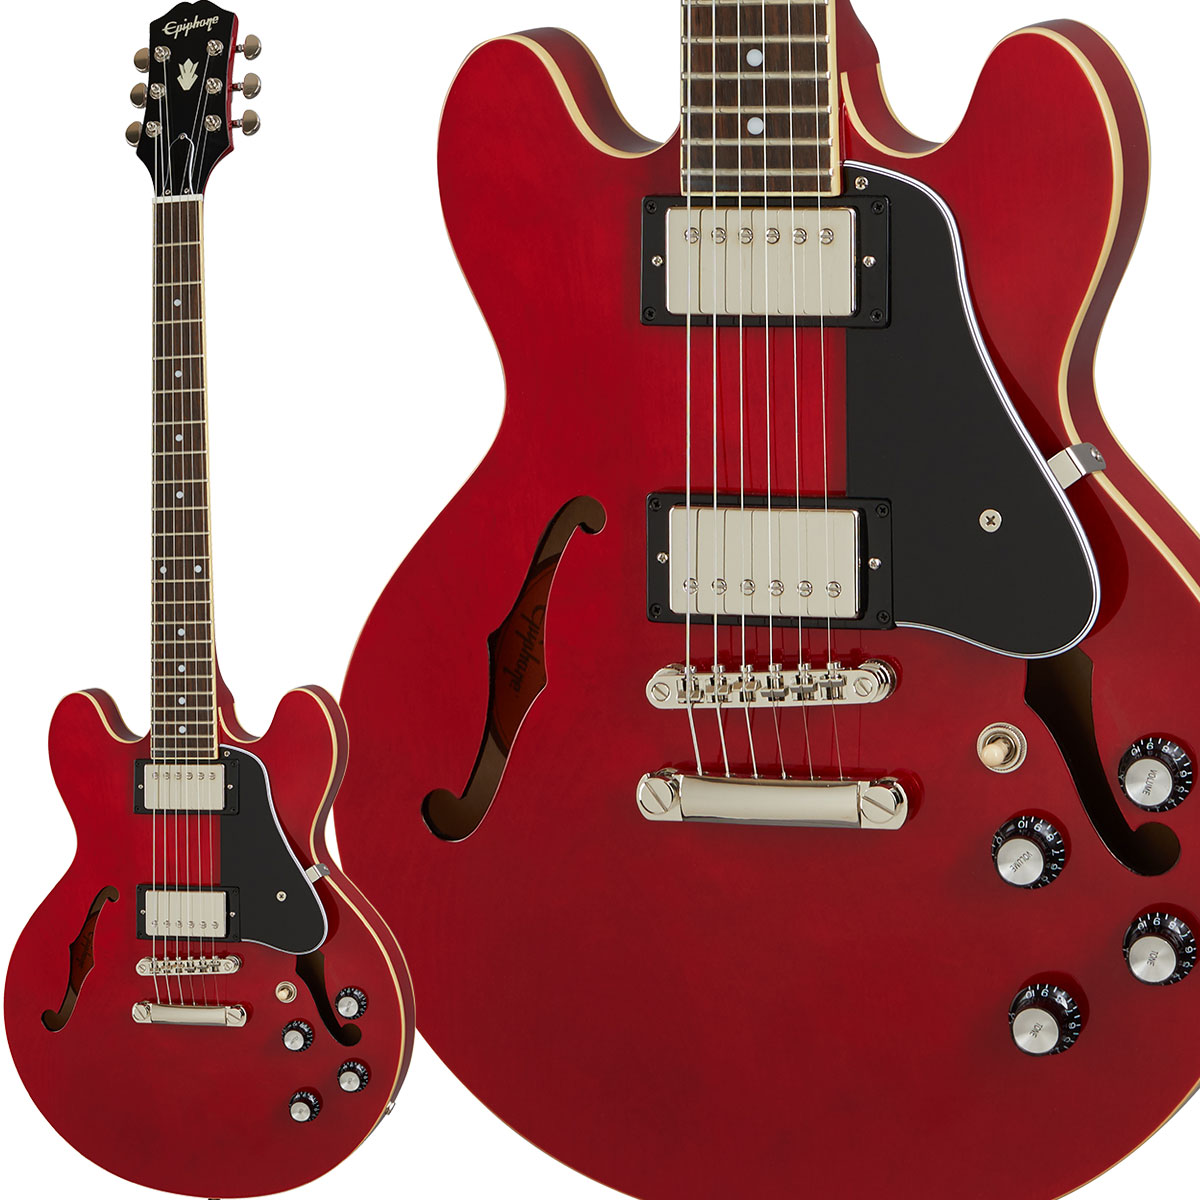 Epiphone エピフォン エレキギター ES-339 | www.innoveering.net